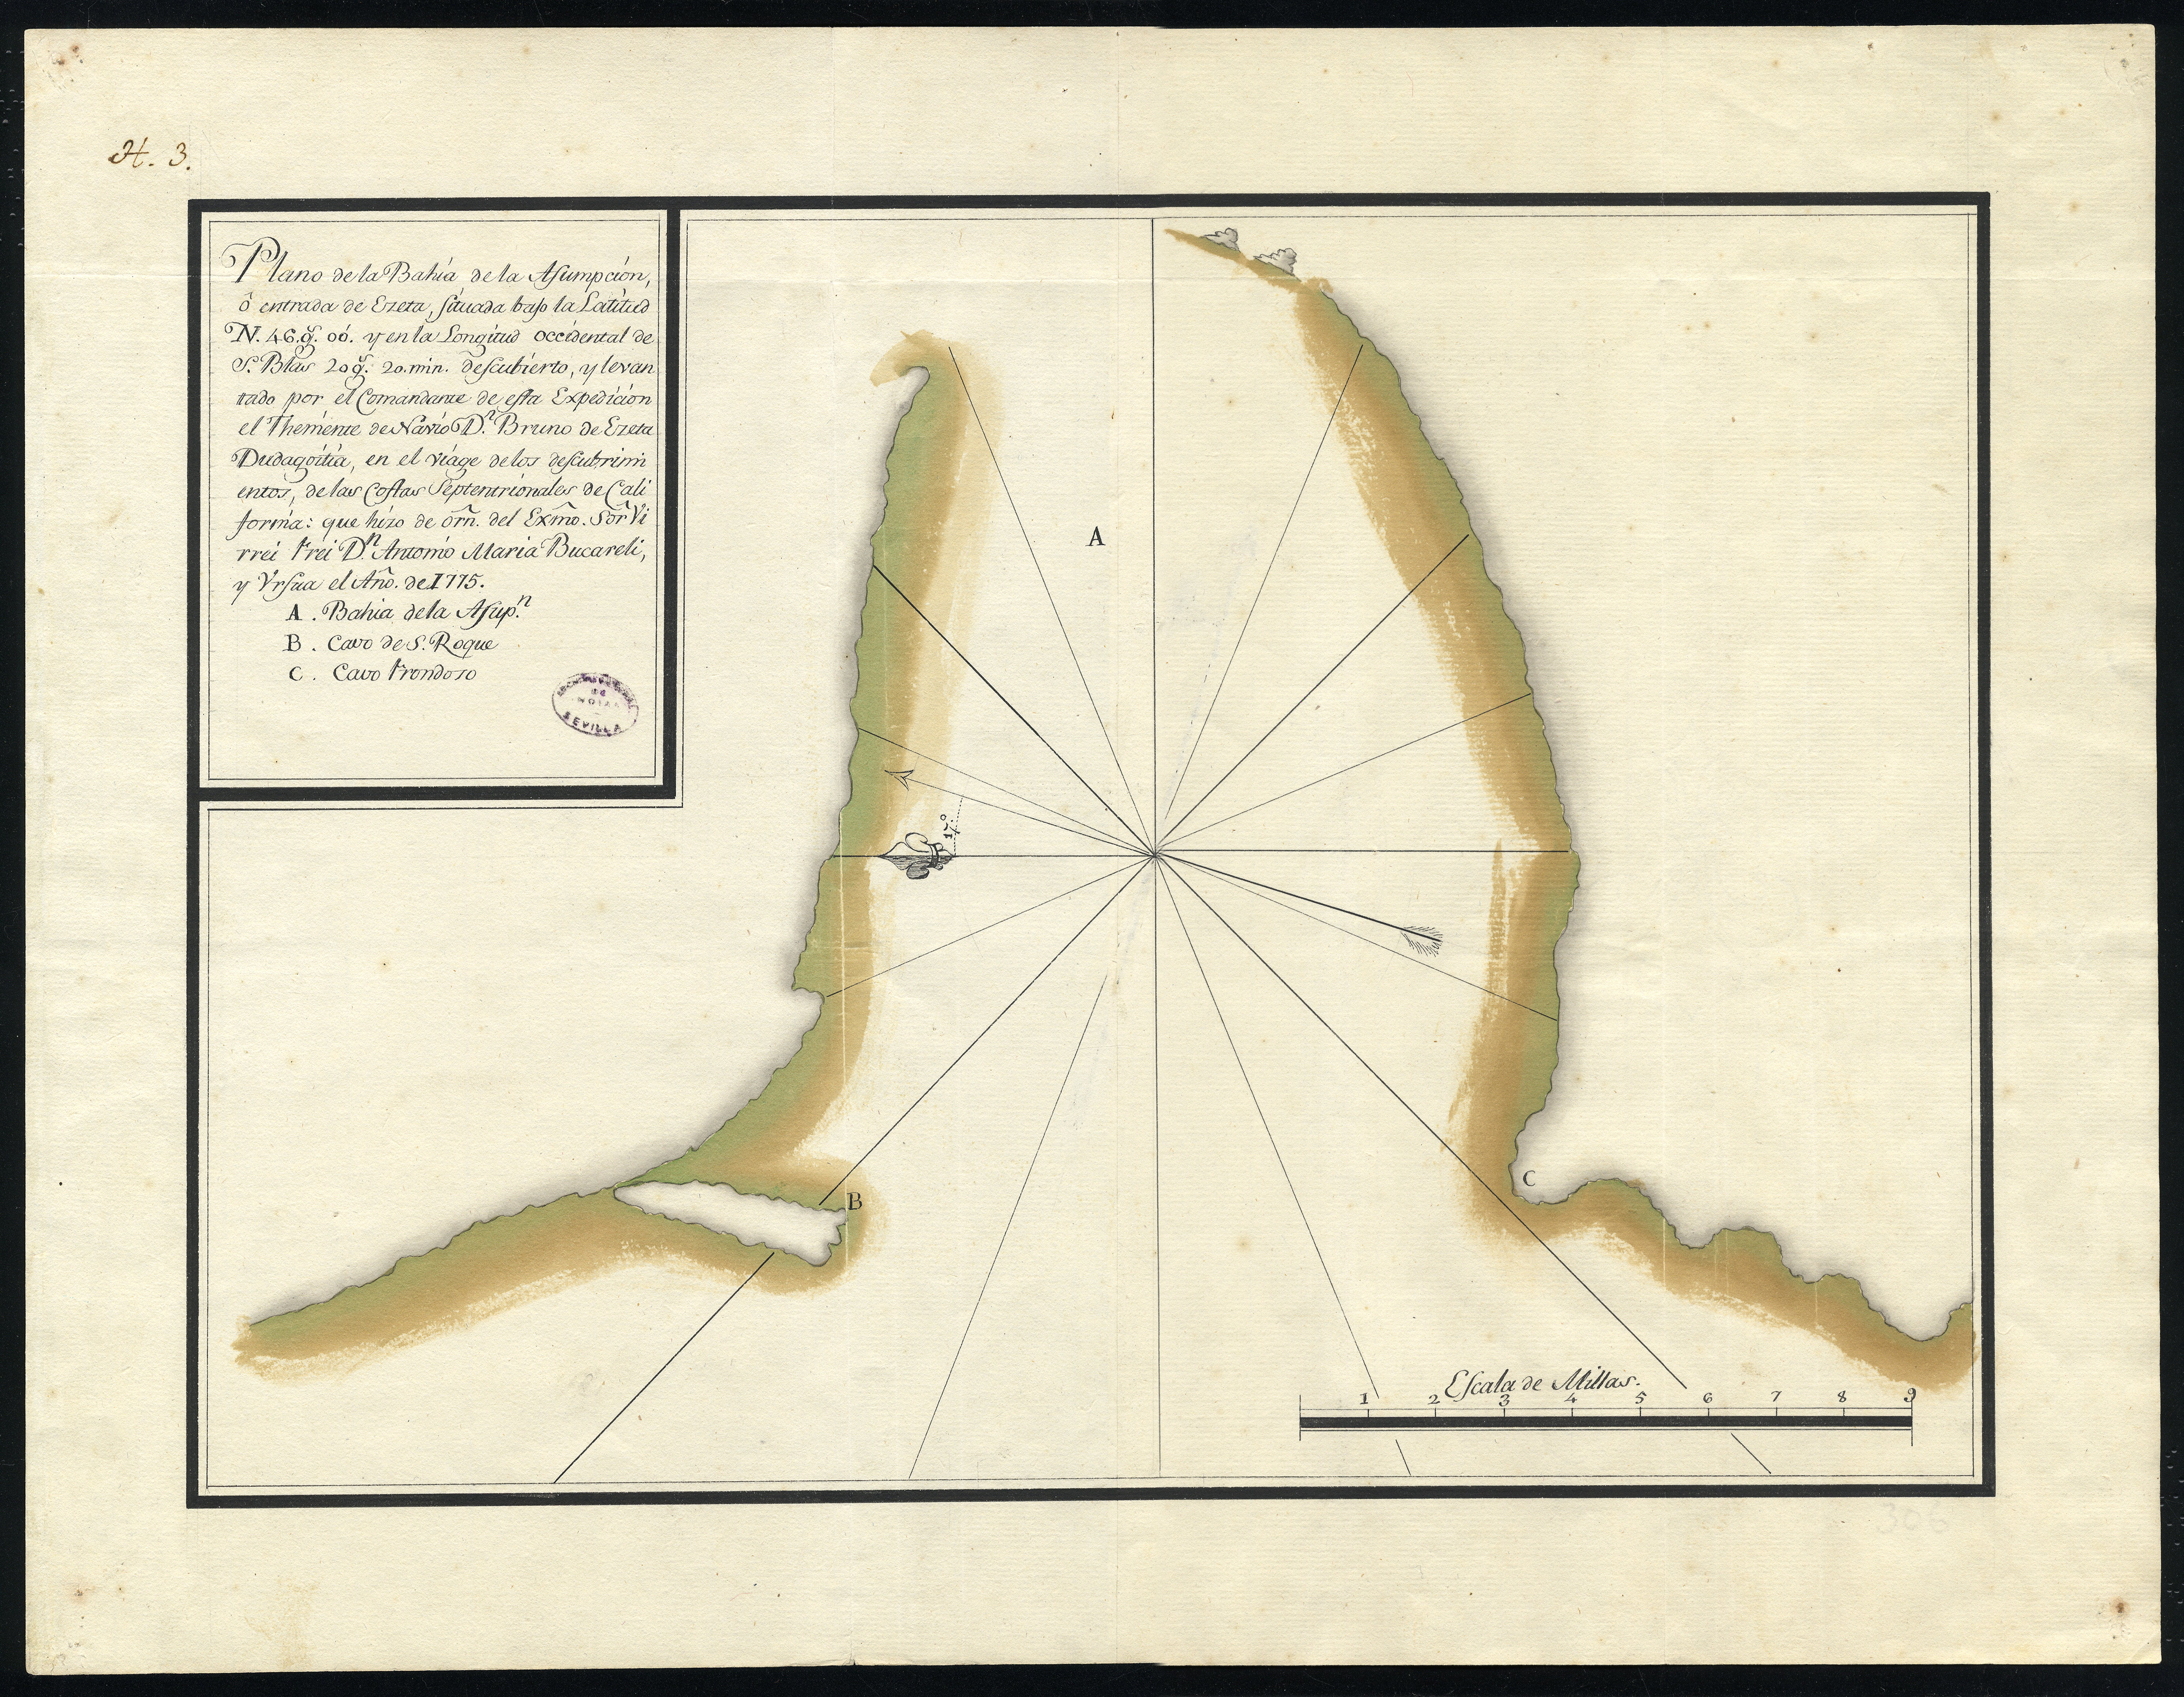 Spanish Exploration: Hezeta (Heceta) and Bodega y Quadra Expedition of 1775  to Formally Claim the Pacific Northwest for Spain 